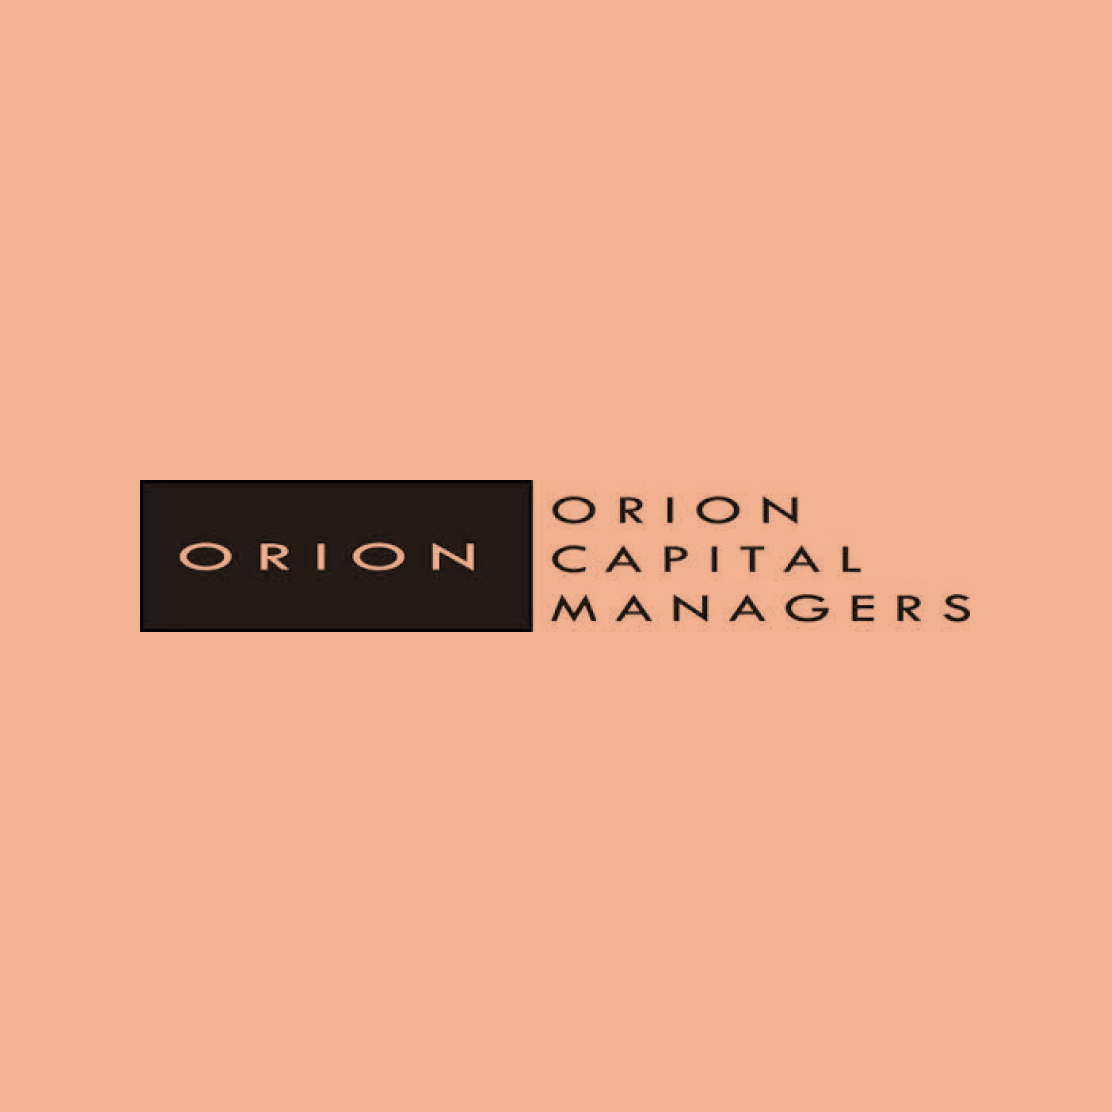 orion-capital-managers